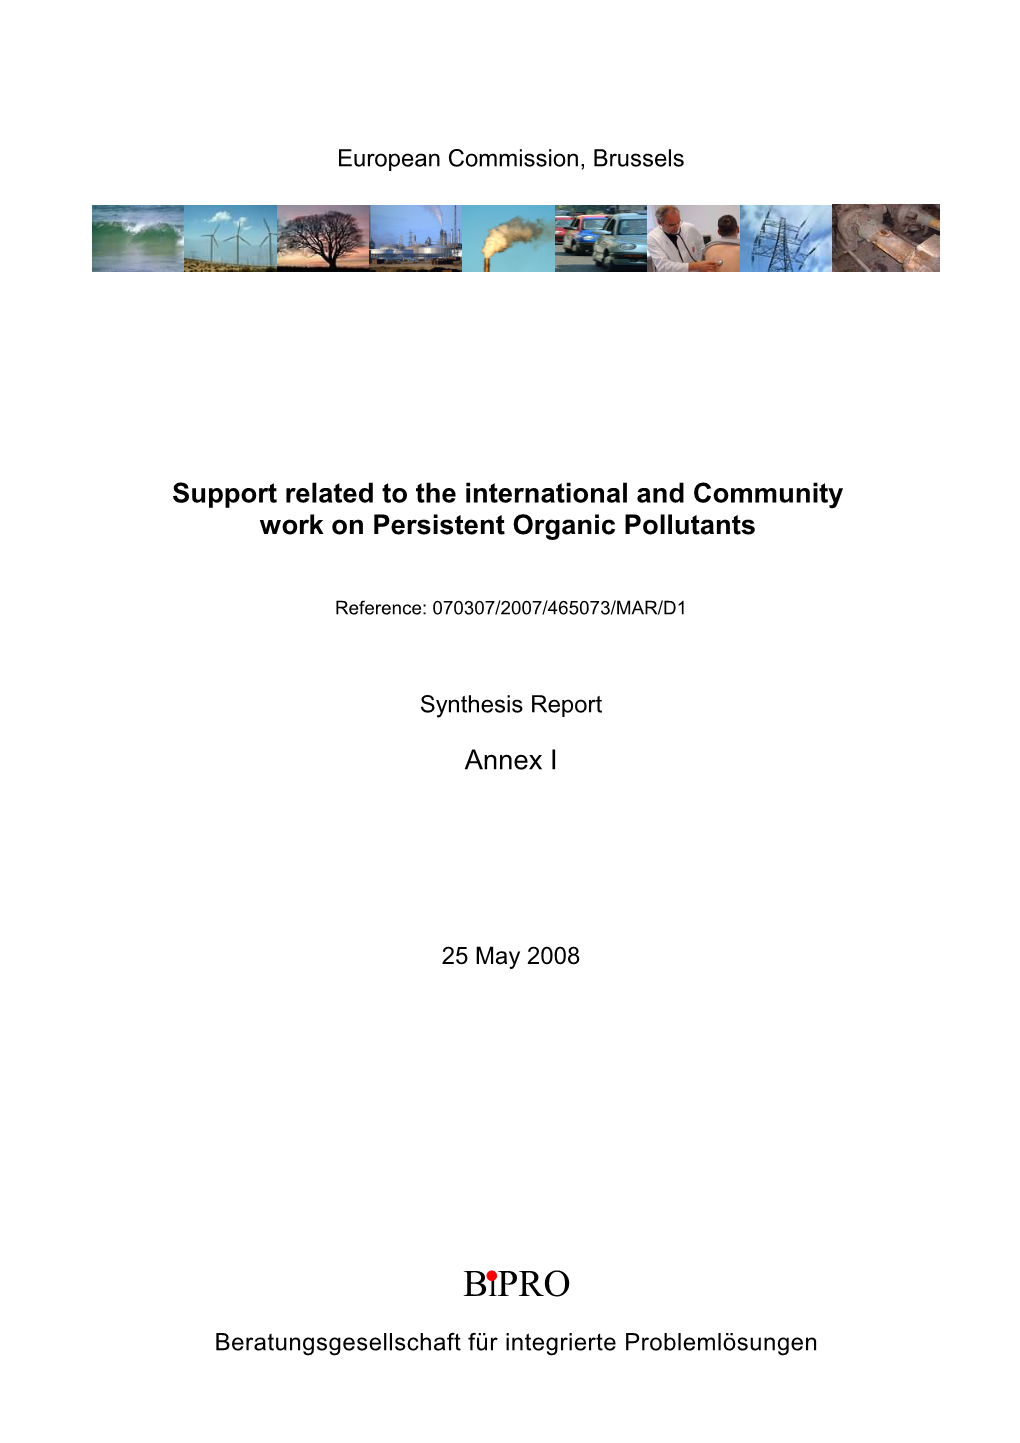 Support Related to the International and Community Work on Persistent Organic Pollutants